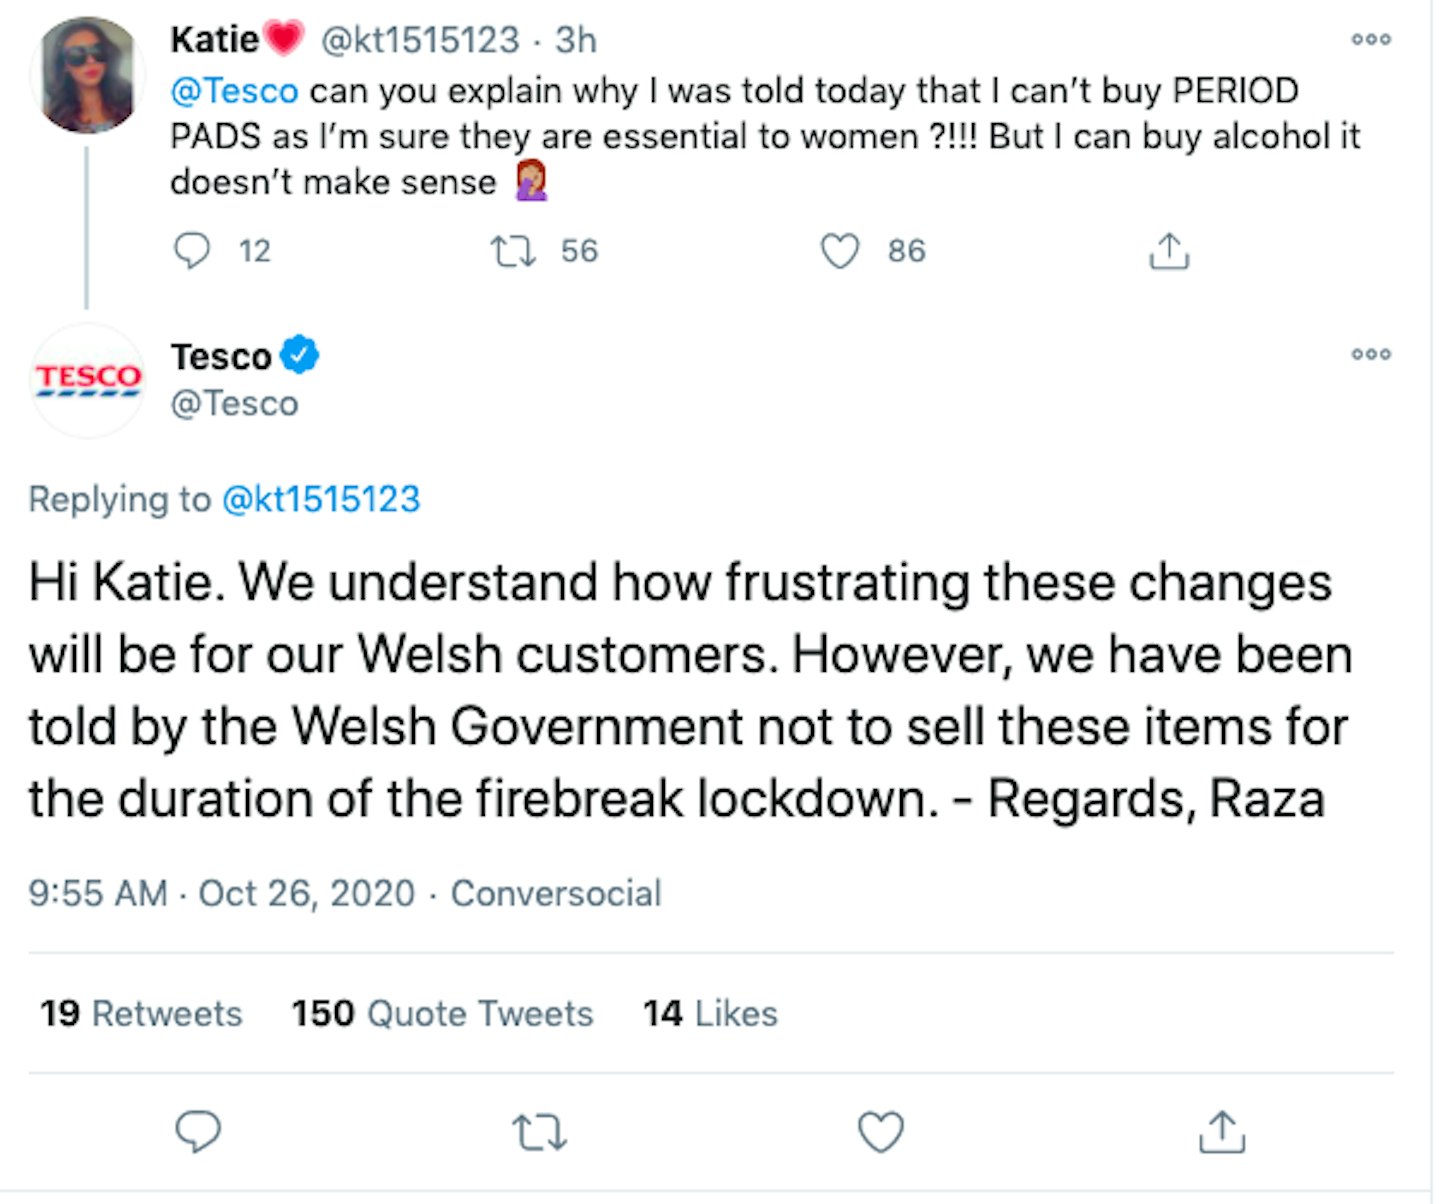 Tesco tweet about period products